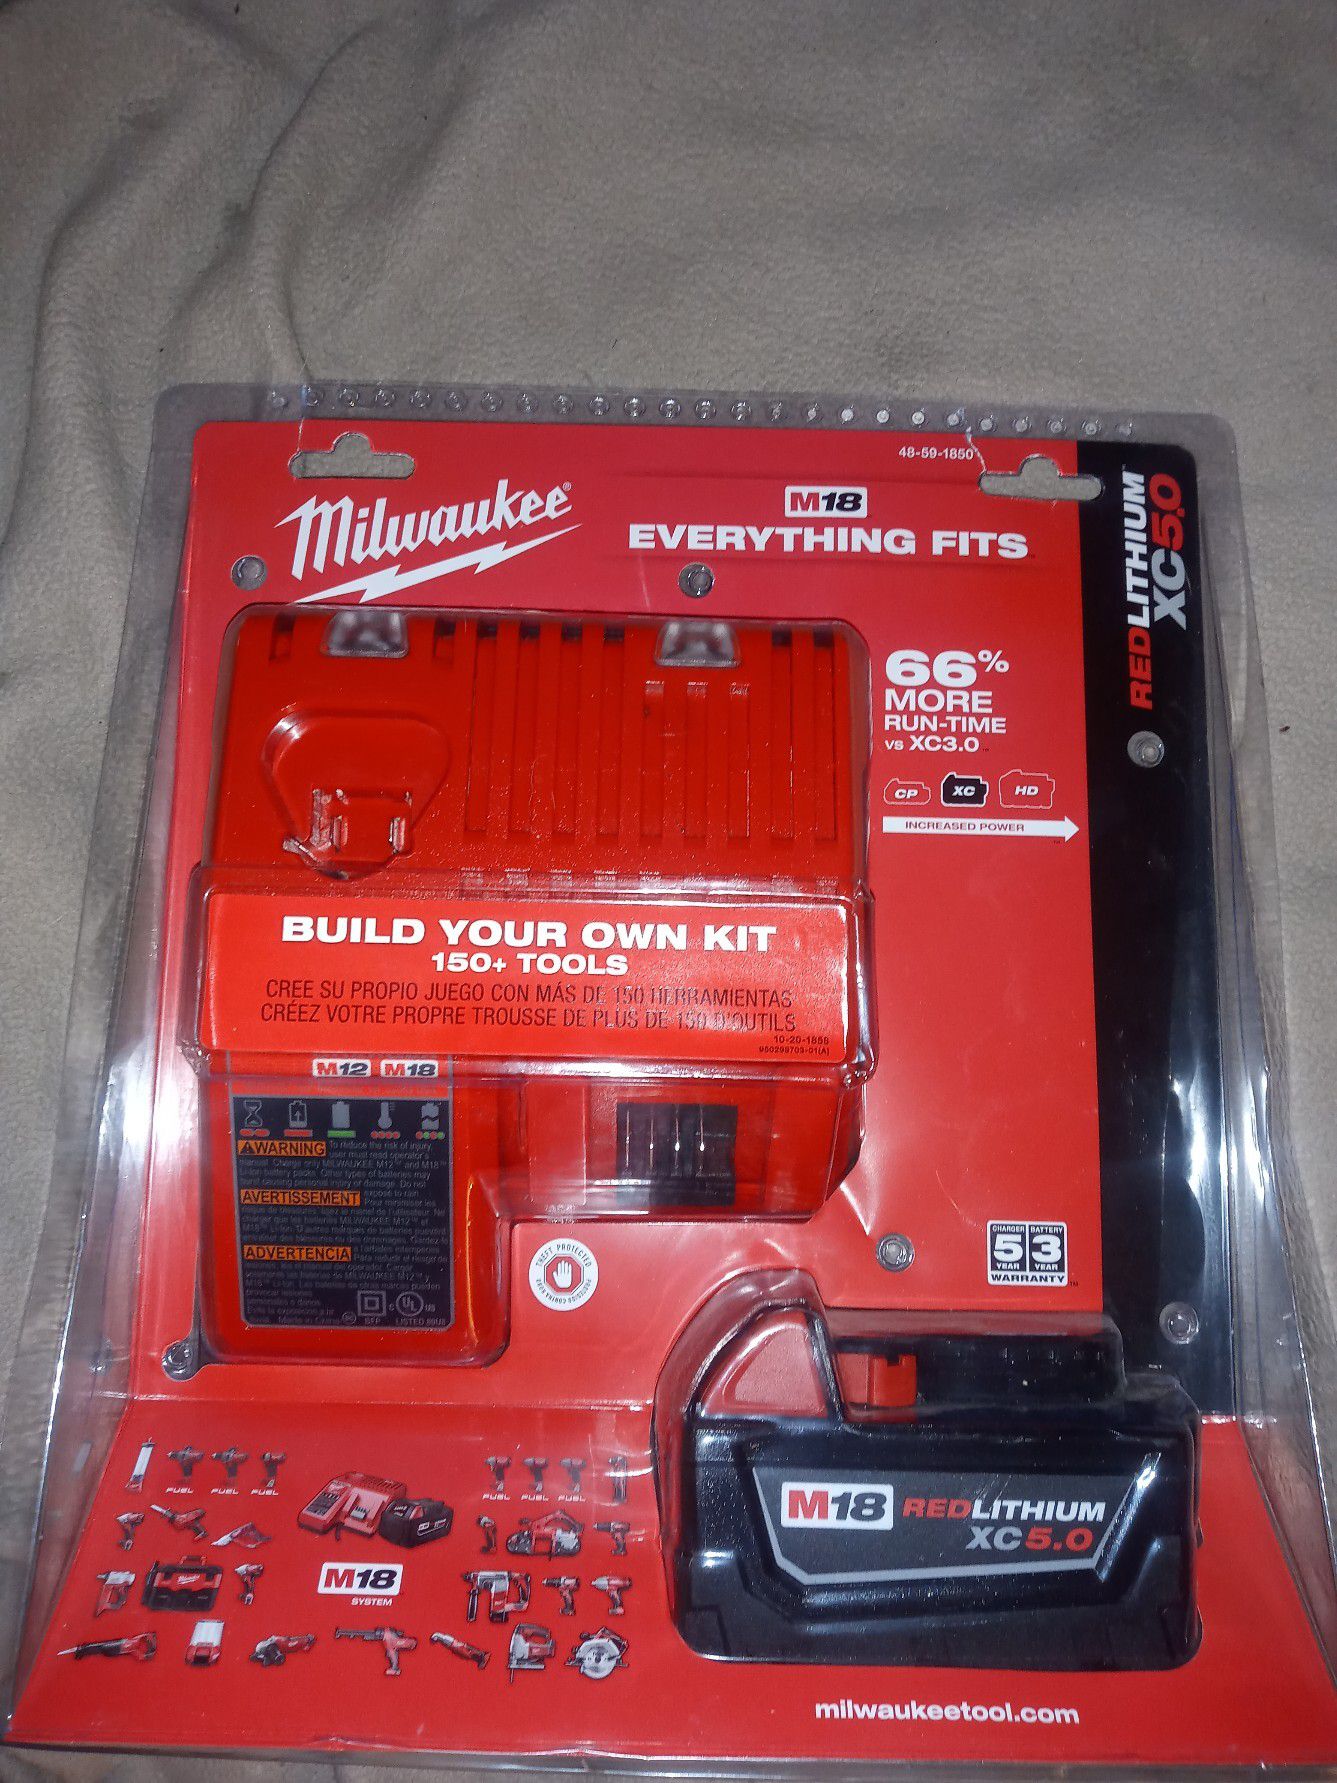 Milwaukee m18 XC5.0 Battery and charger kit